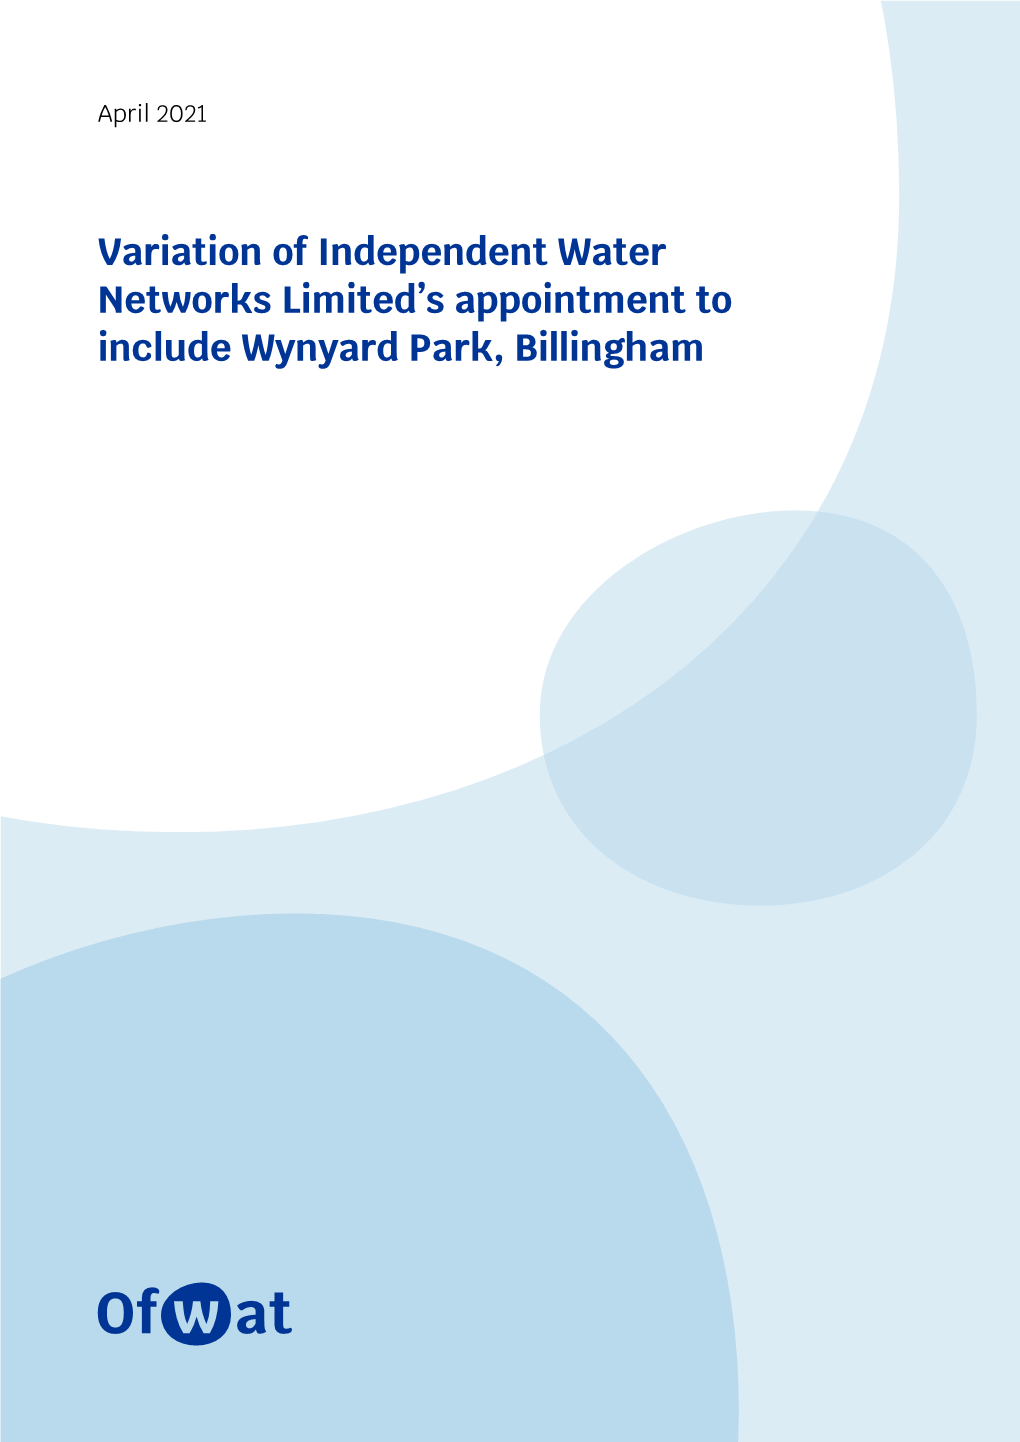 Variation of Independent Water Networks Limited's Appointment To